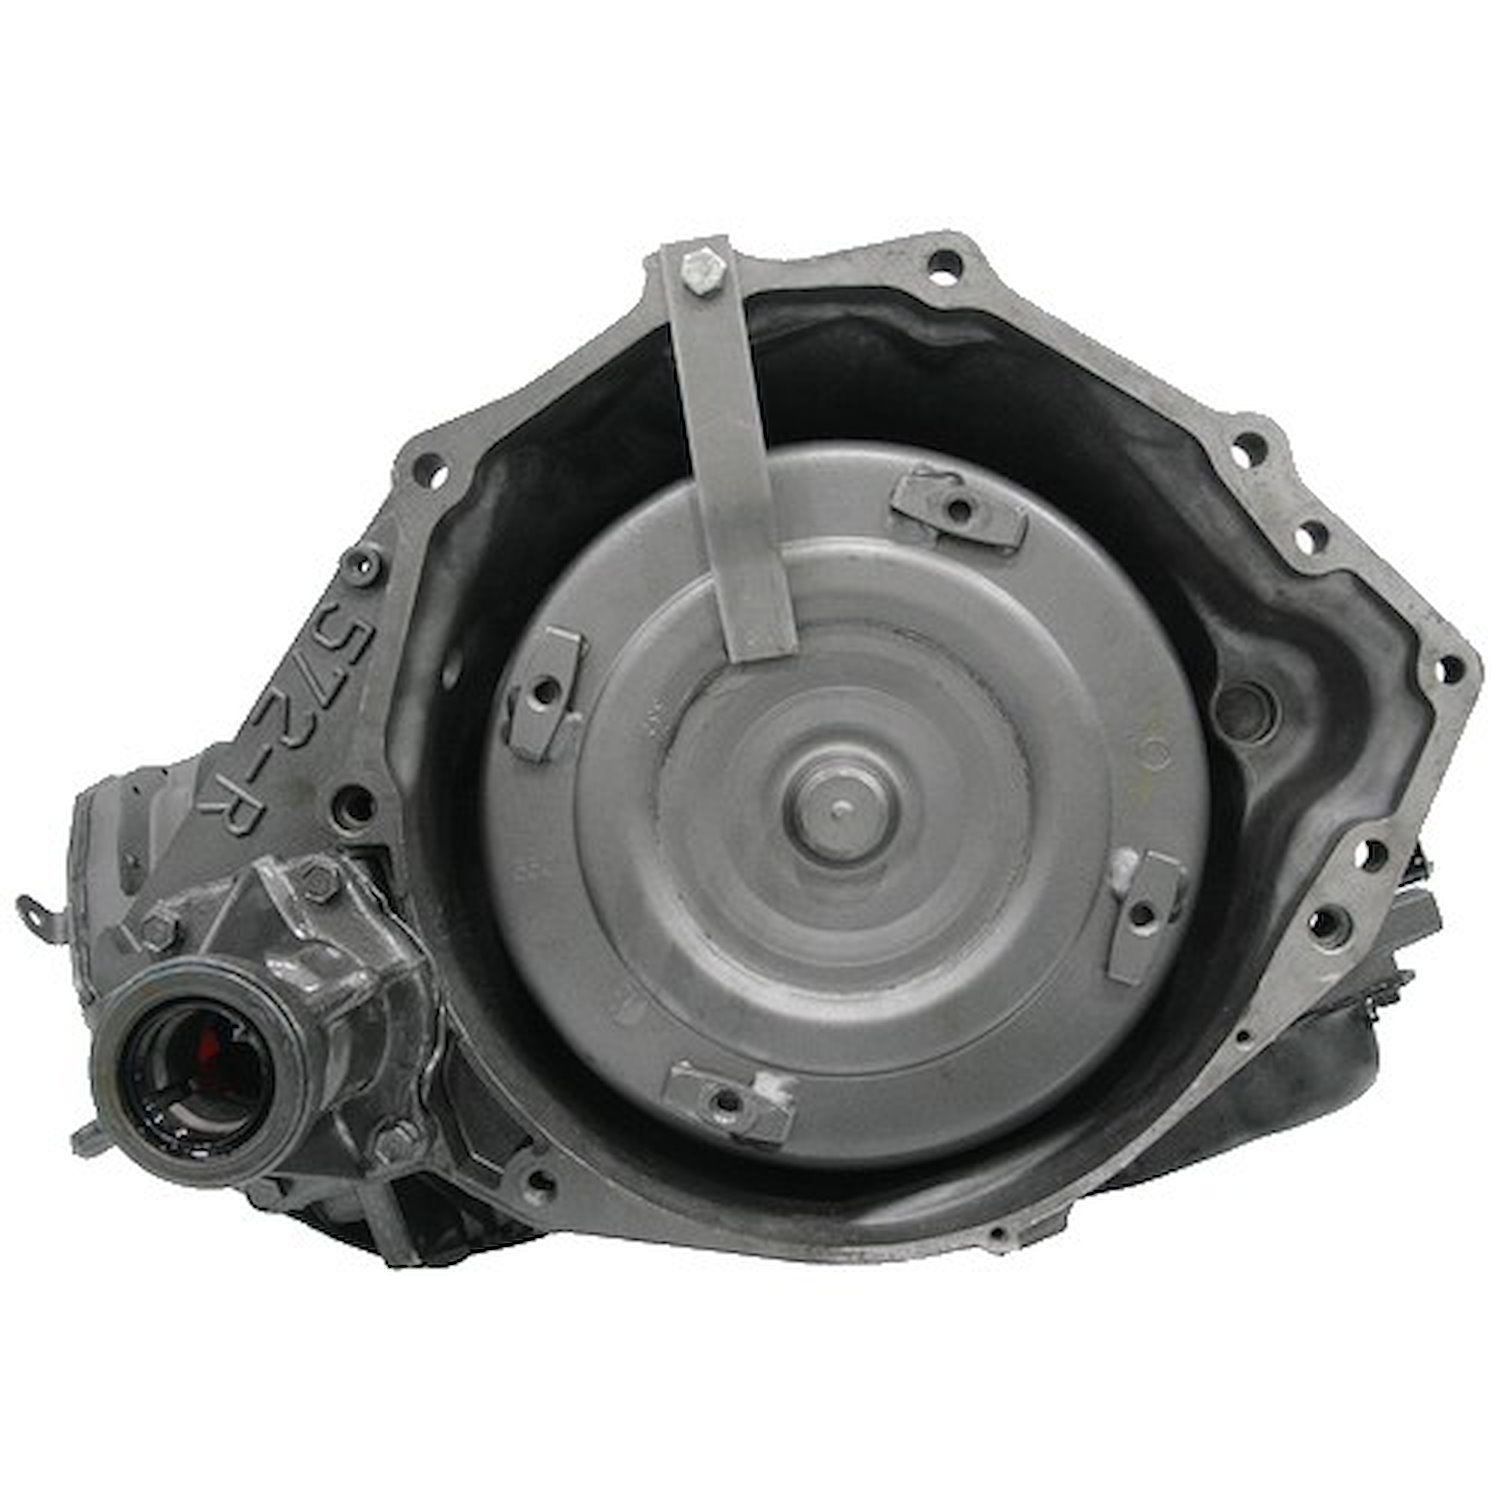 4R70W Reman Auto Trans Fits 2003 Ford ExpeditIon, F150, 2004 Ford F-150 Heritage w/5.4L Triton V8 Eng.